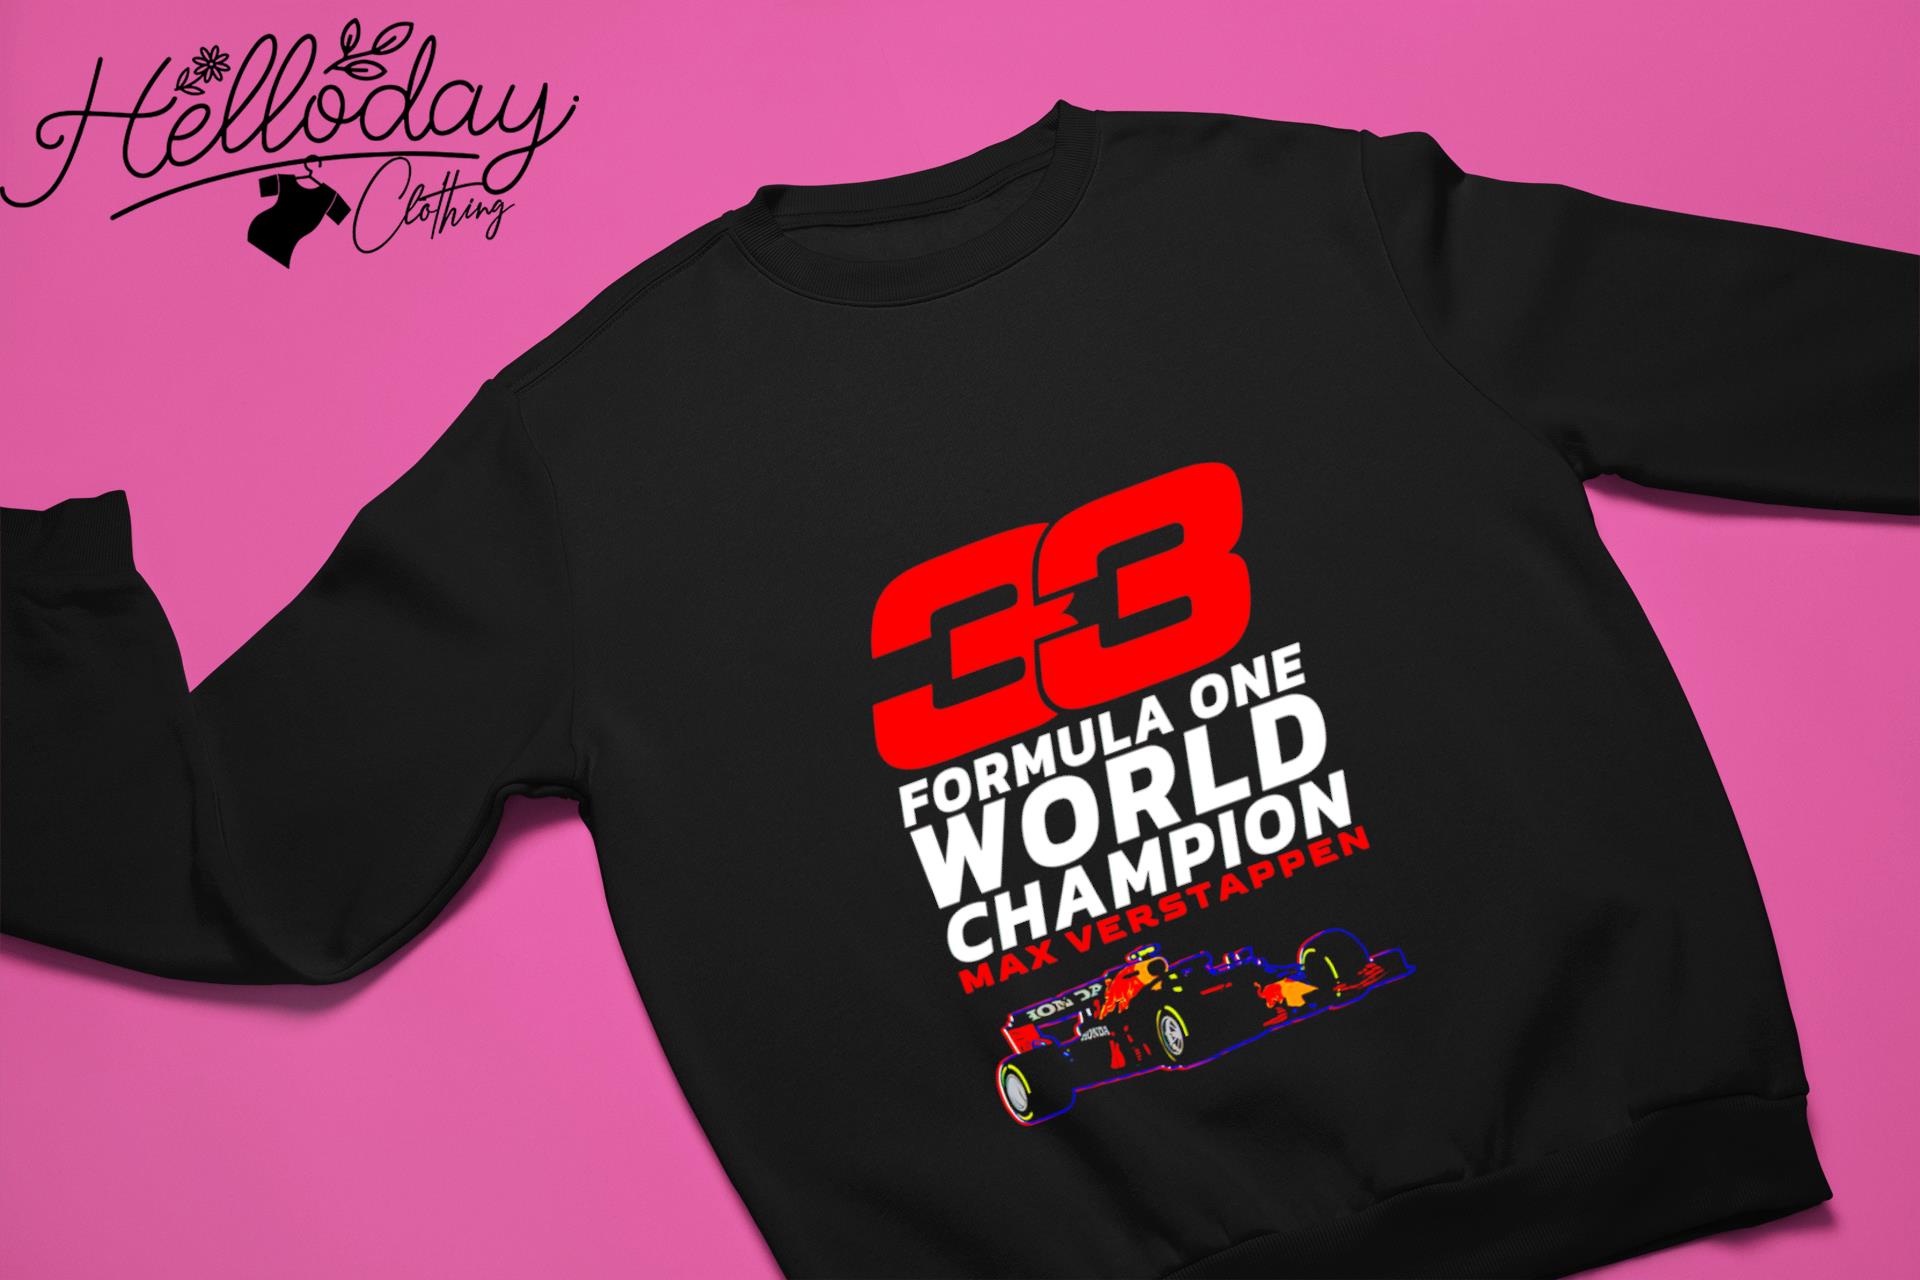 Max Verstappen World Champion Formula 1 2021-2022-20223 Three-time F1  Champion Congratulations T-shirt,Sweater, Hoodie, And Long Sleeved, Ladies,  Tank Top